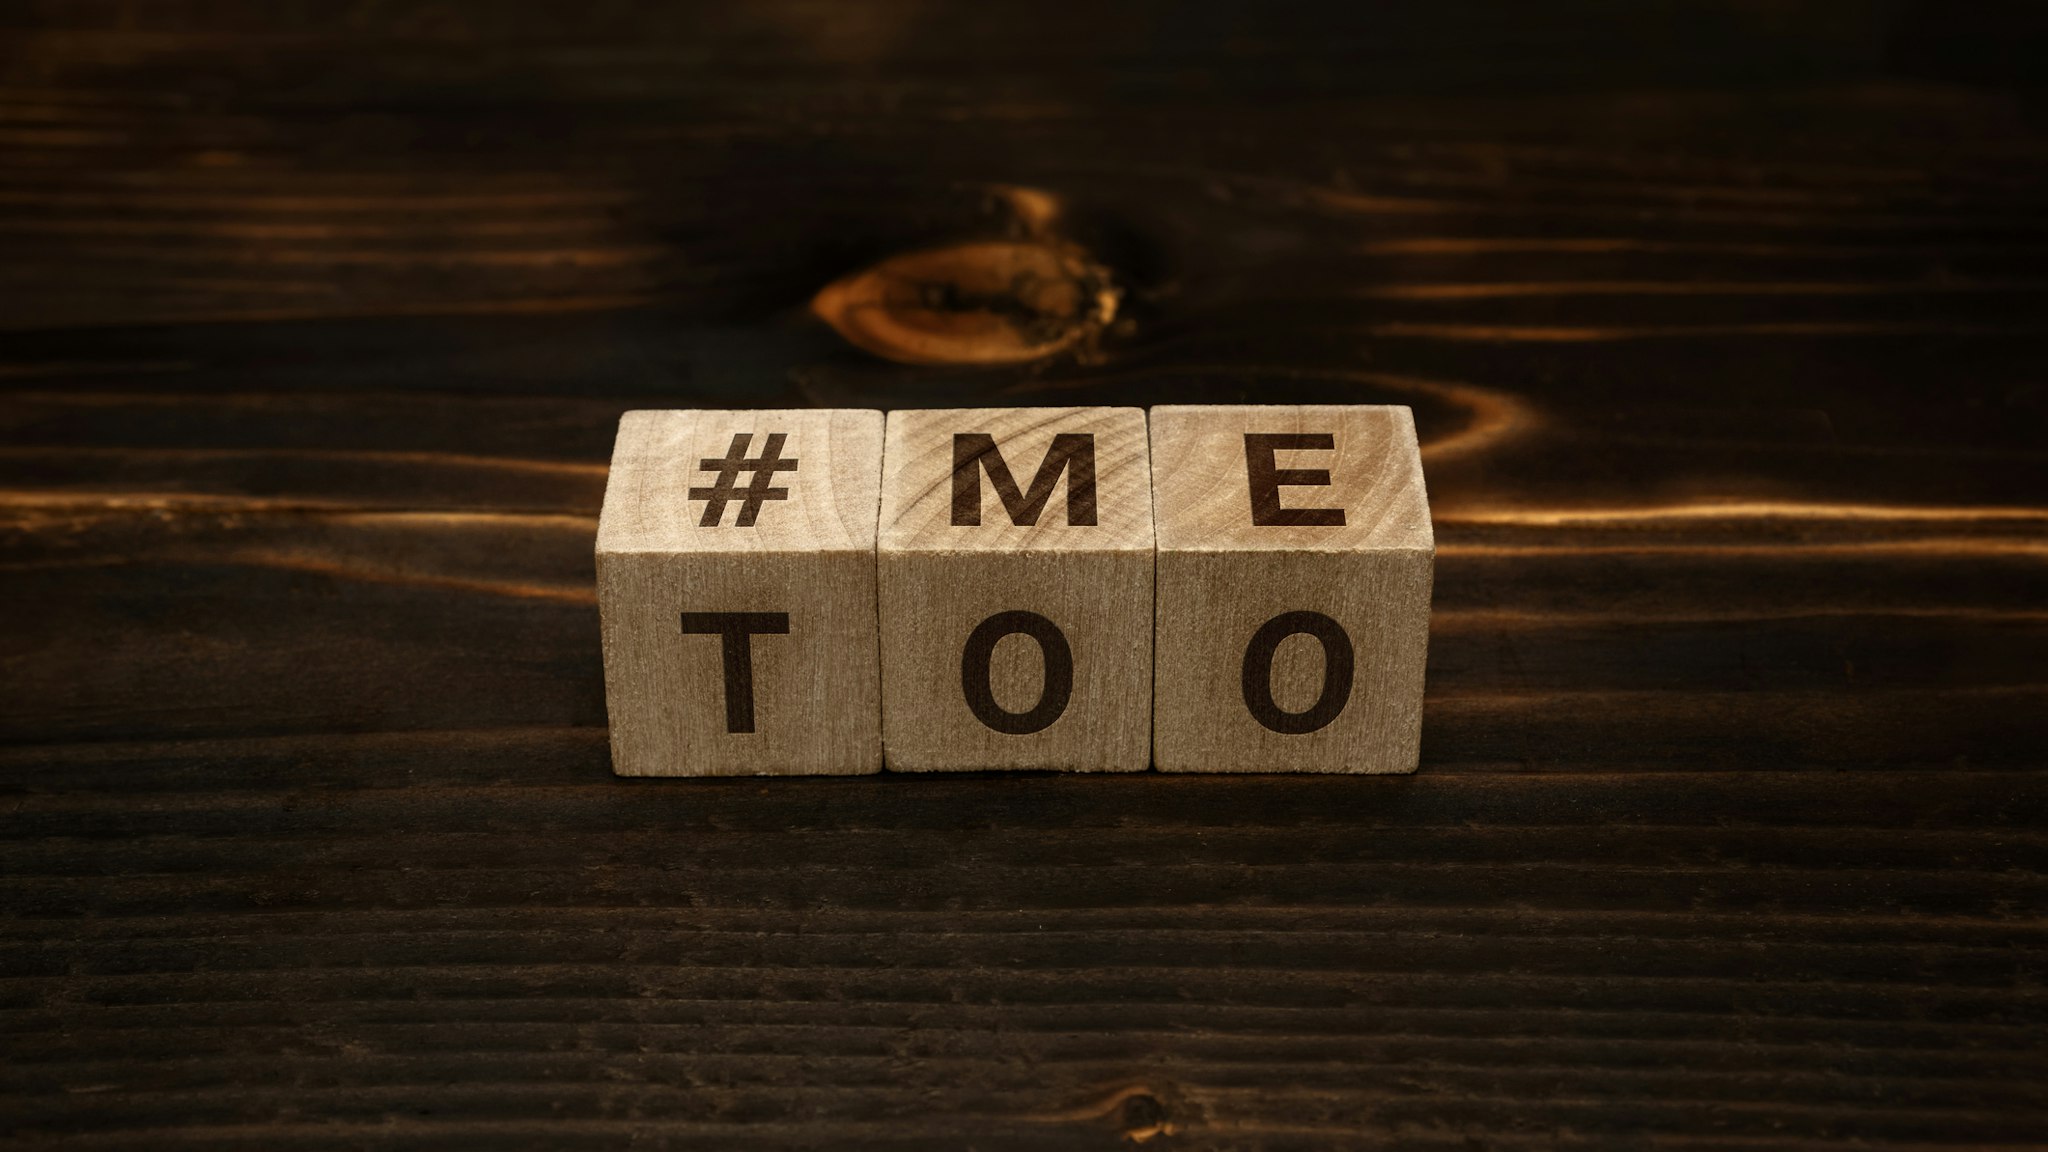 Hashtag Me Too Words on Wooden Blocks - stock photo